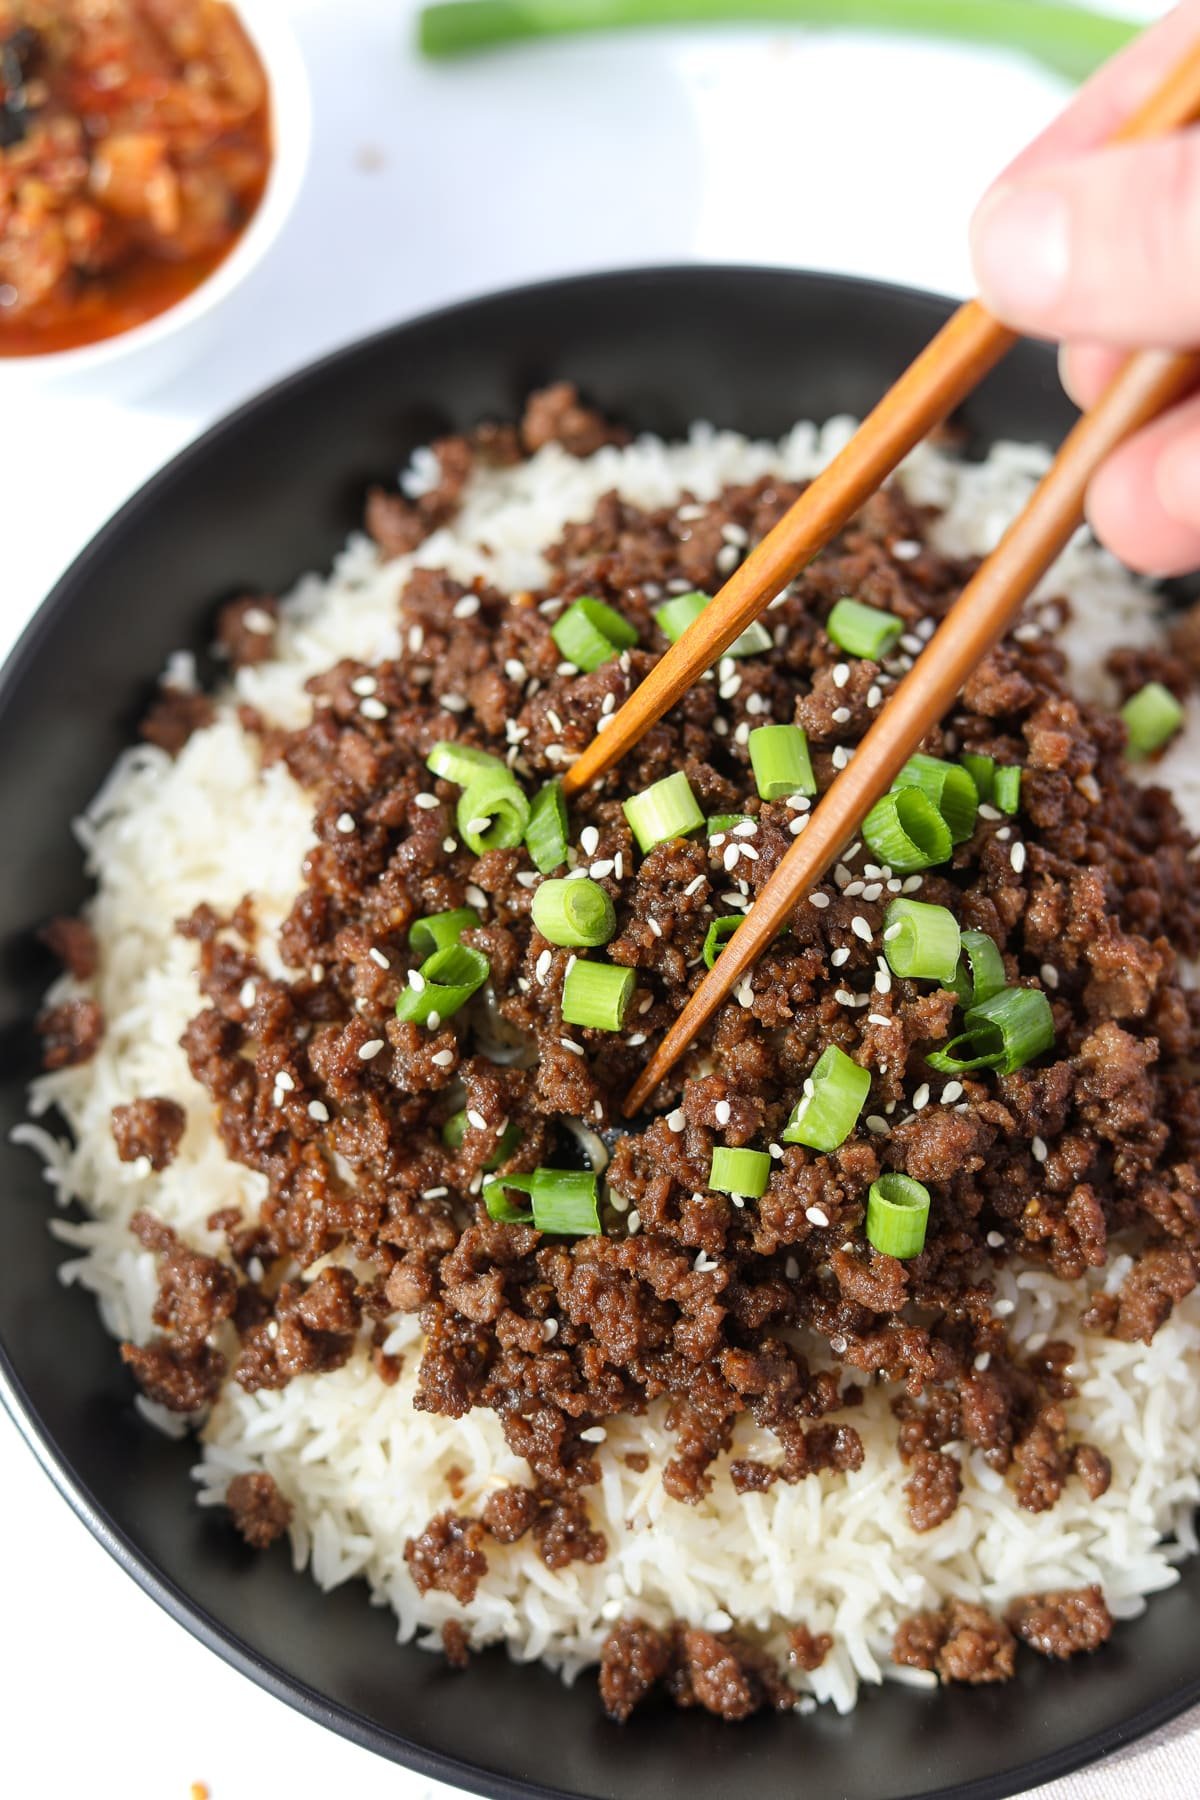 Using chopsticks to take a portion of rice and beef bowls.